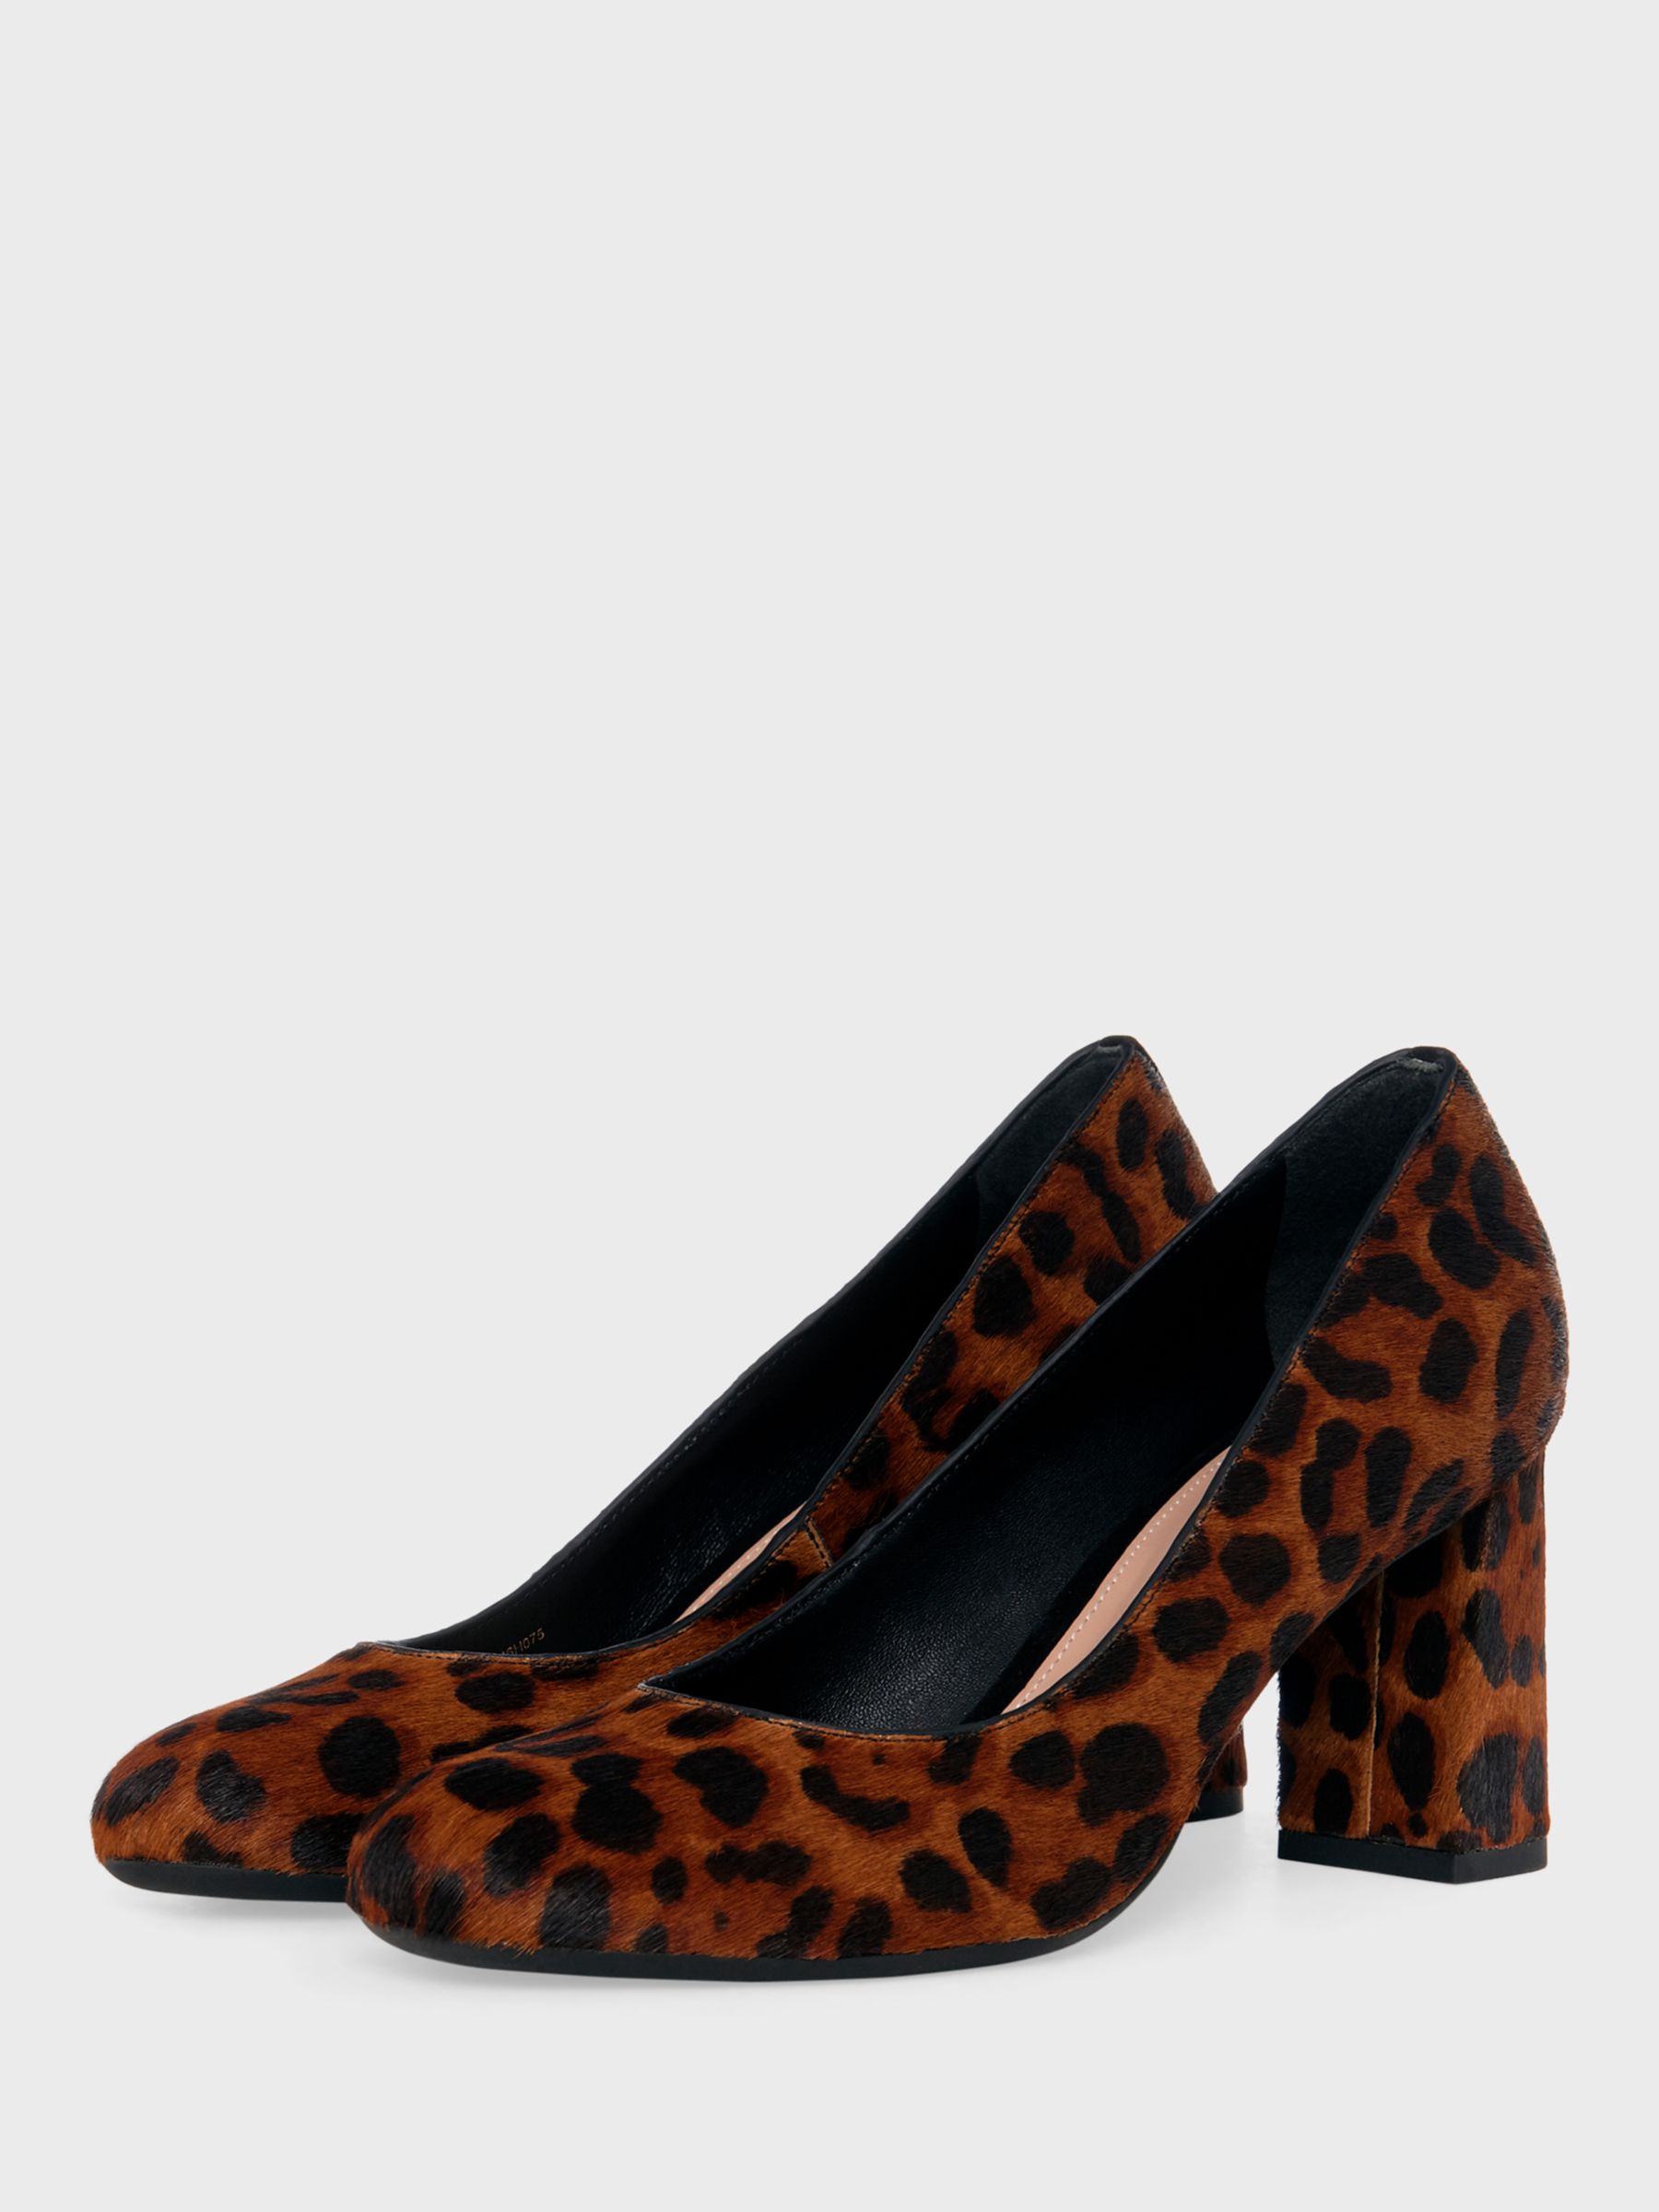 Hobbs Sonia Leopard Leather Court Shoes, Brown, 4